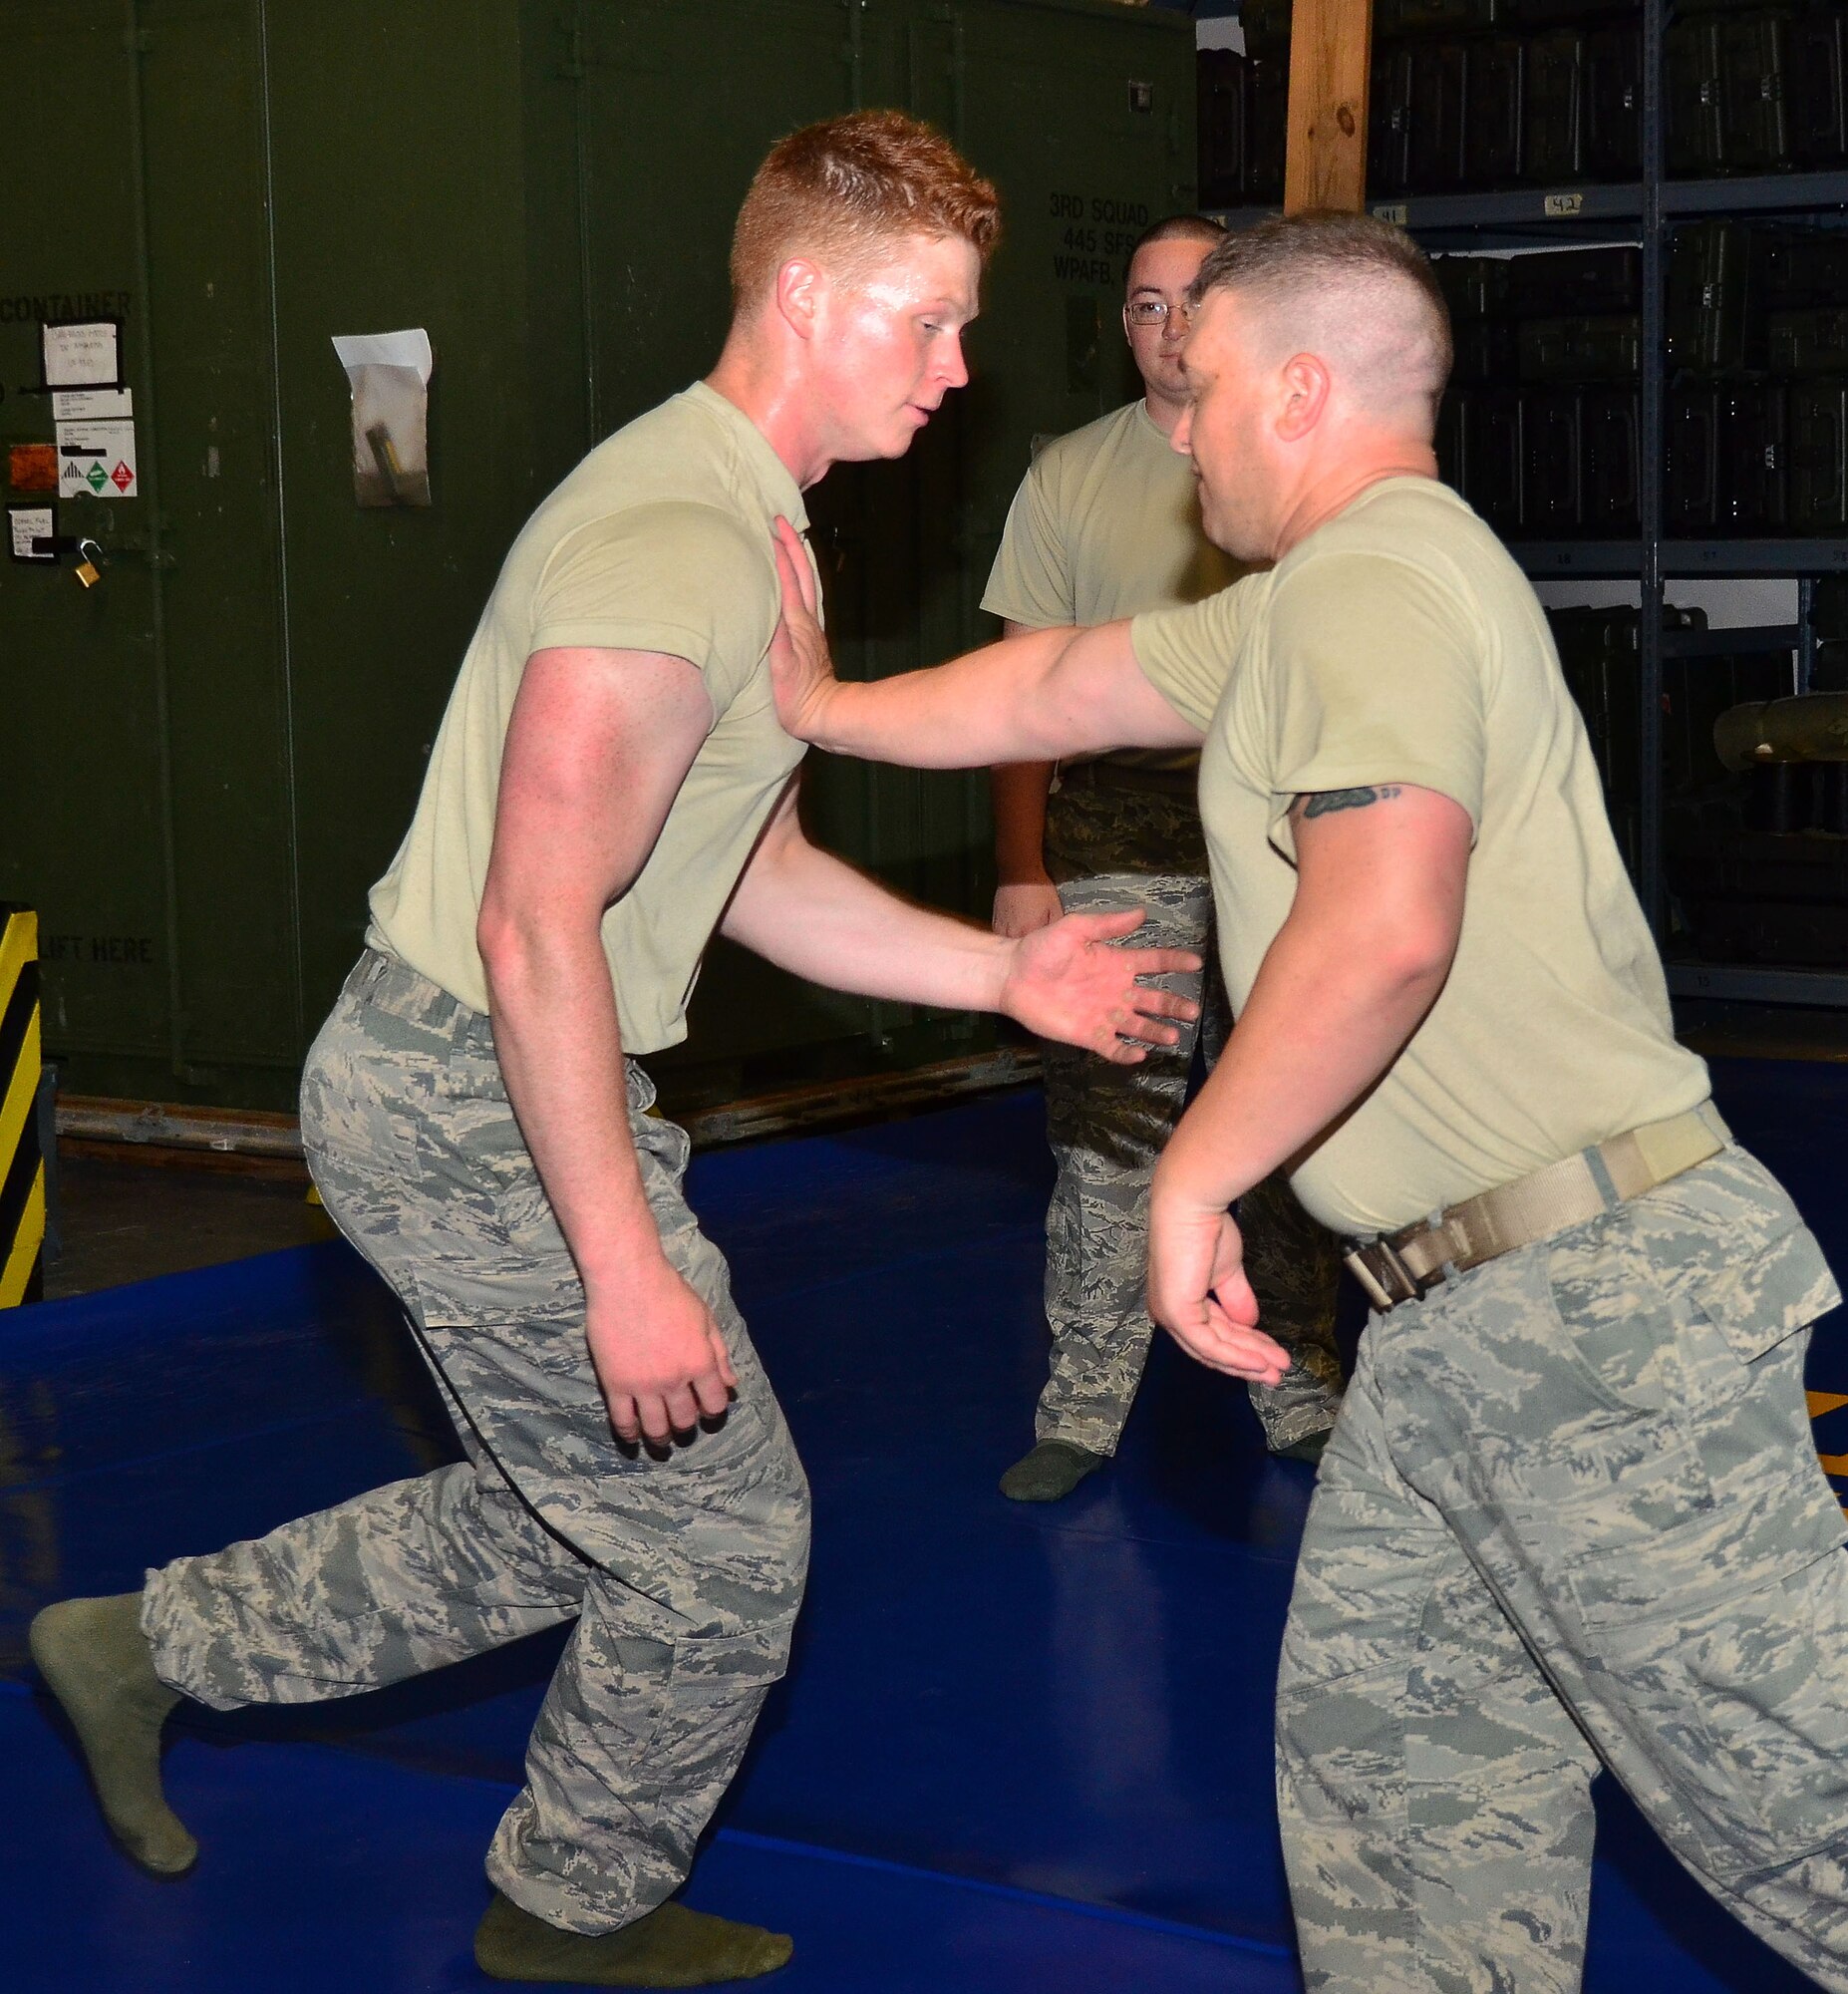 WRIGHT-PATTERSON AIR FORCE BASE, Ohio - Staff Sgt. Michael O’Callaghan, 445th Security Forces Squadron journeyman, teaches new combative techniques while using Senior Airman Shayne Denihan, 445 SFS helper, as a model during the July 13 unit training assembly. (U.S. Air Force photo/Staff Sgt. Amanda Duncan)